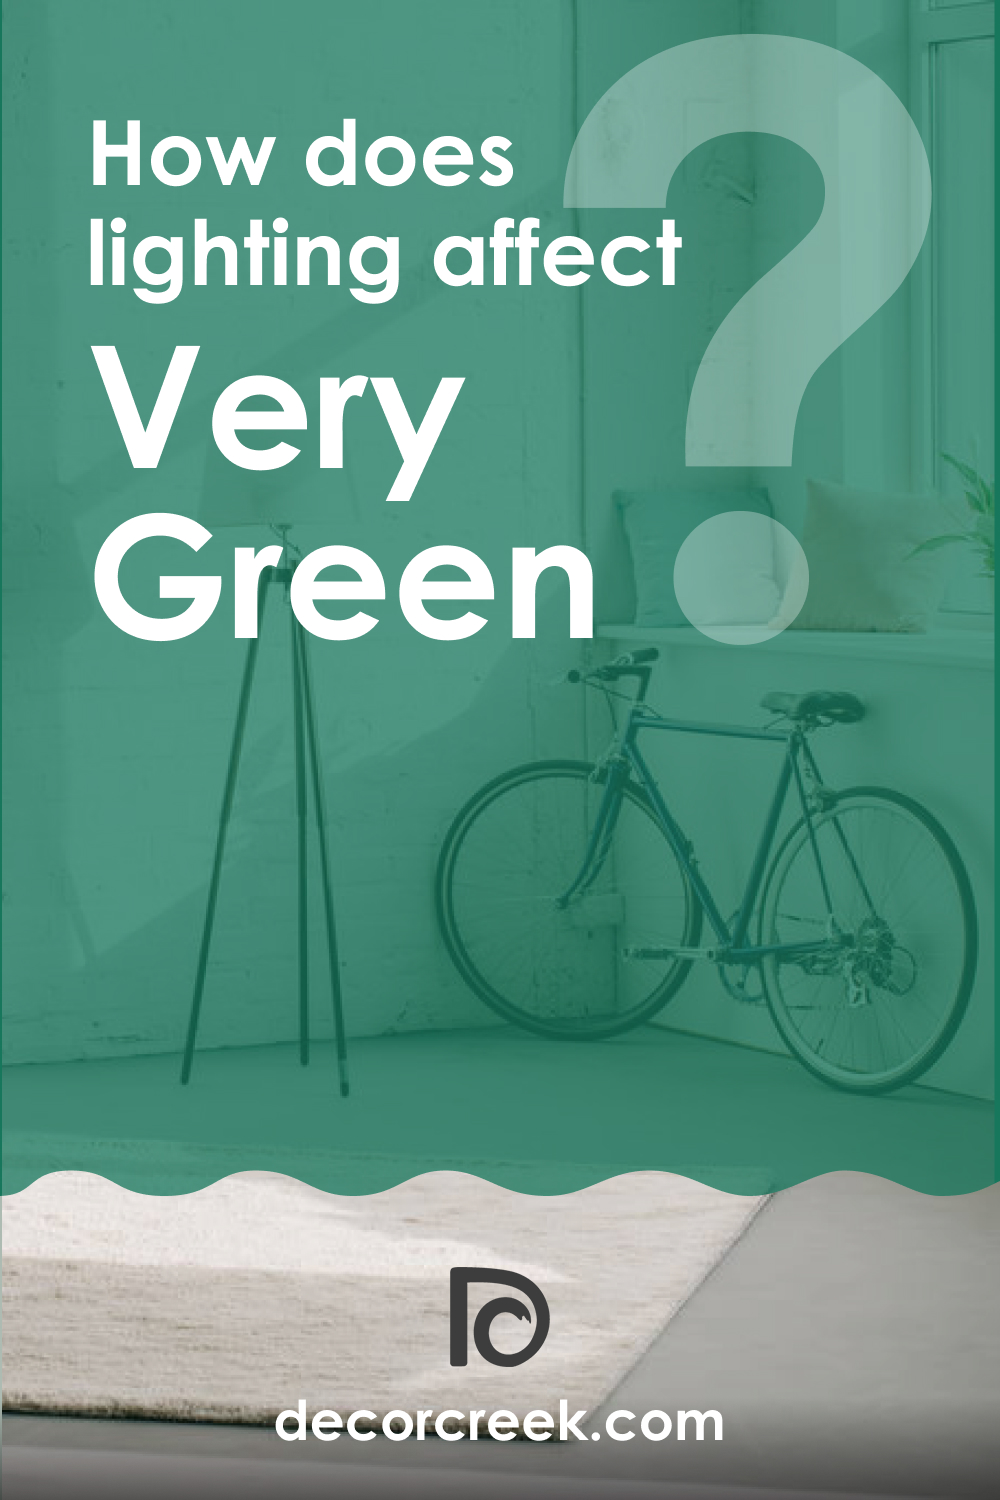 How Does Lighting Affect Very Green 2040-30?